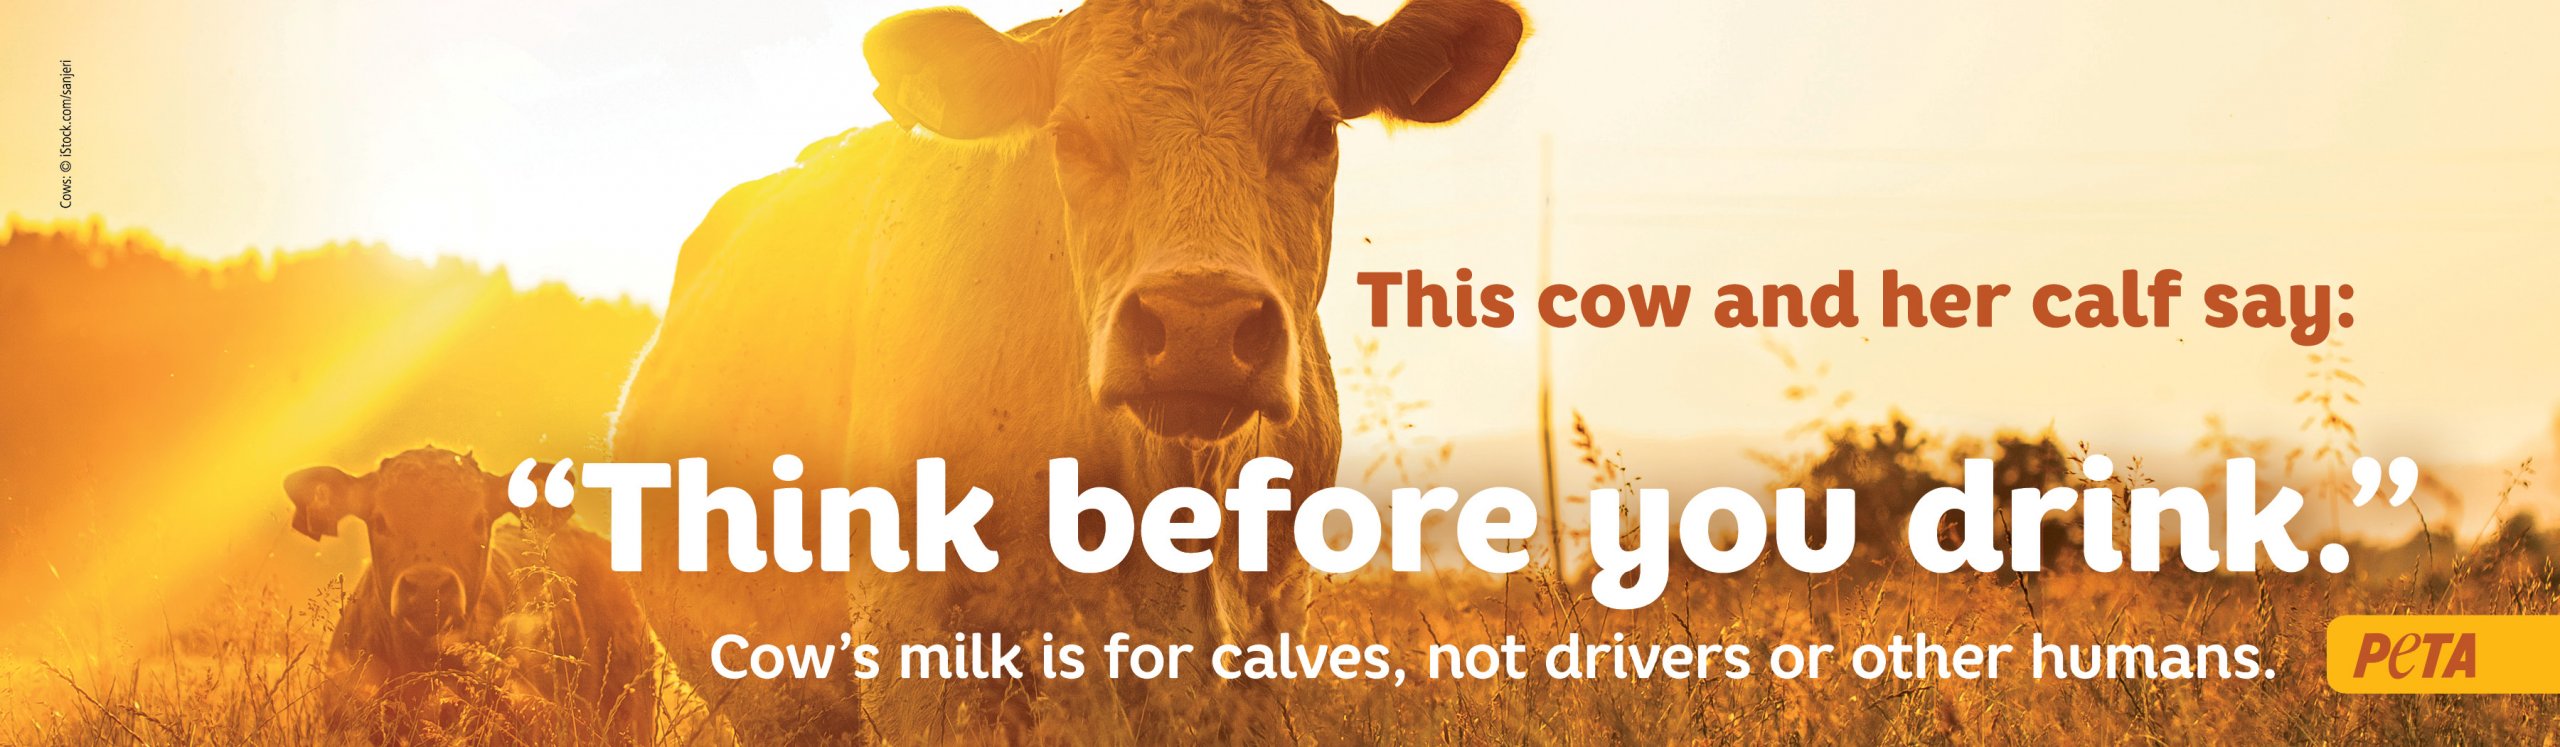 PETA billboard ad with a cow and her calf along with a message urging car racing drivers and everyone to "Think before you drink."